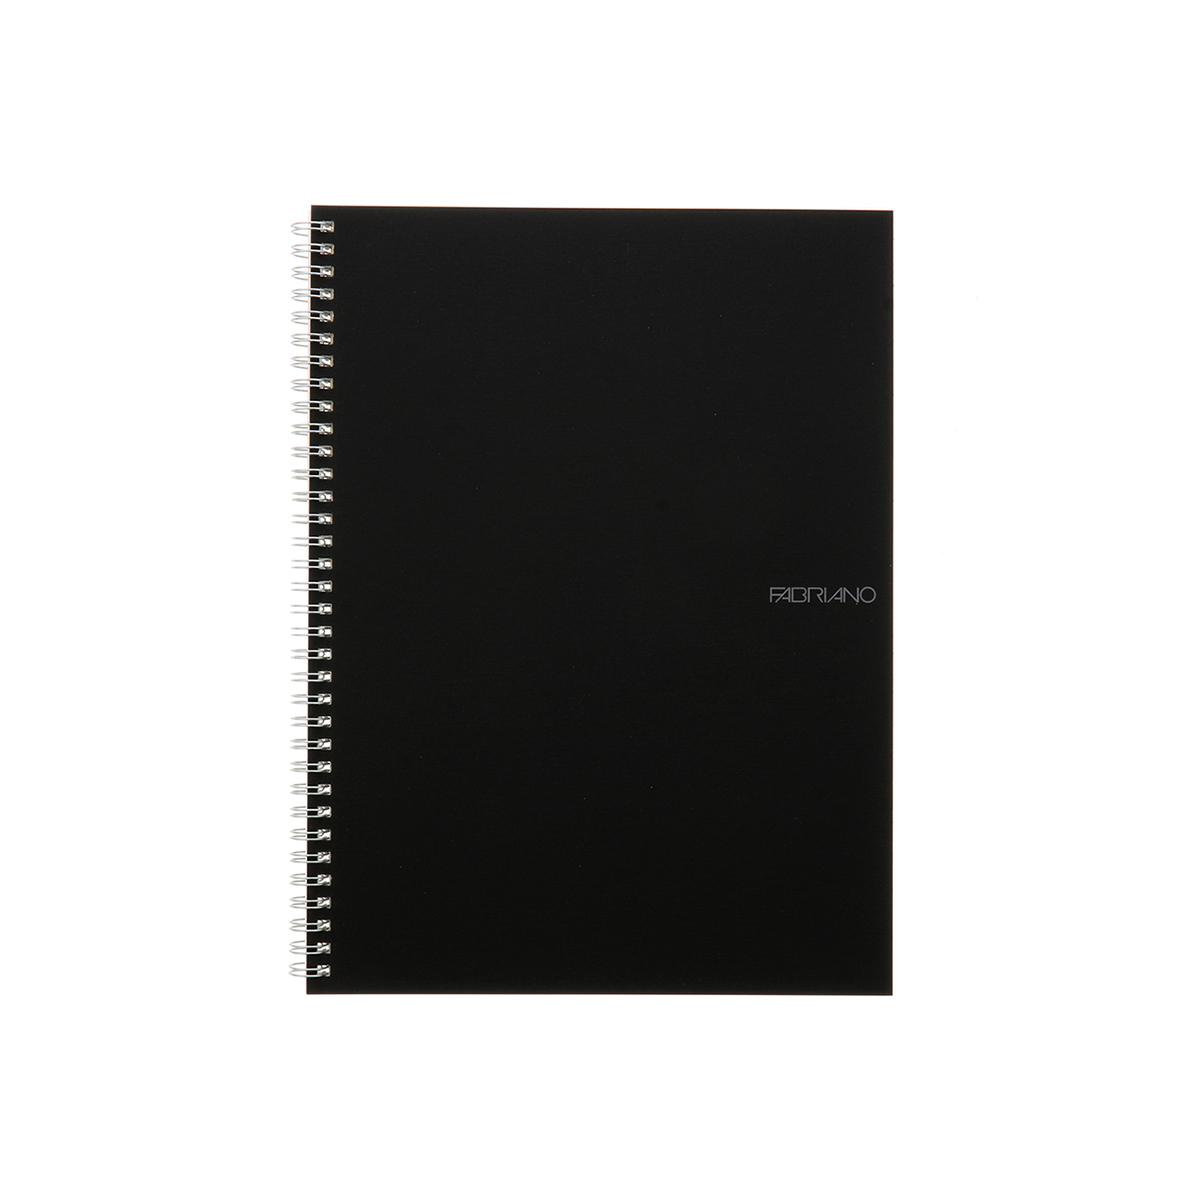 Fabriano Spiral-Bound Landscape Drawing Book - Black